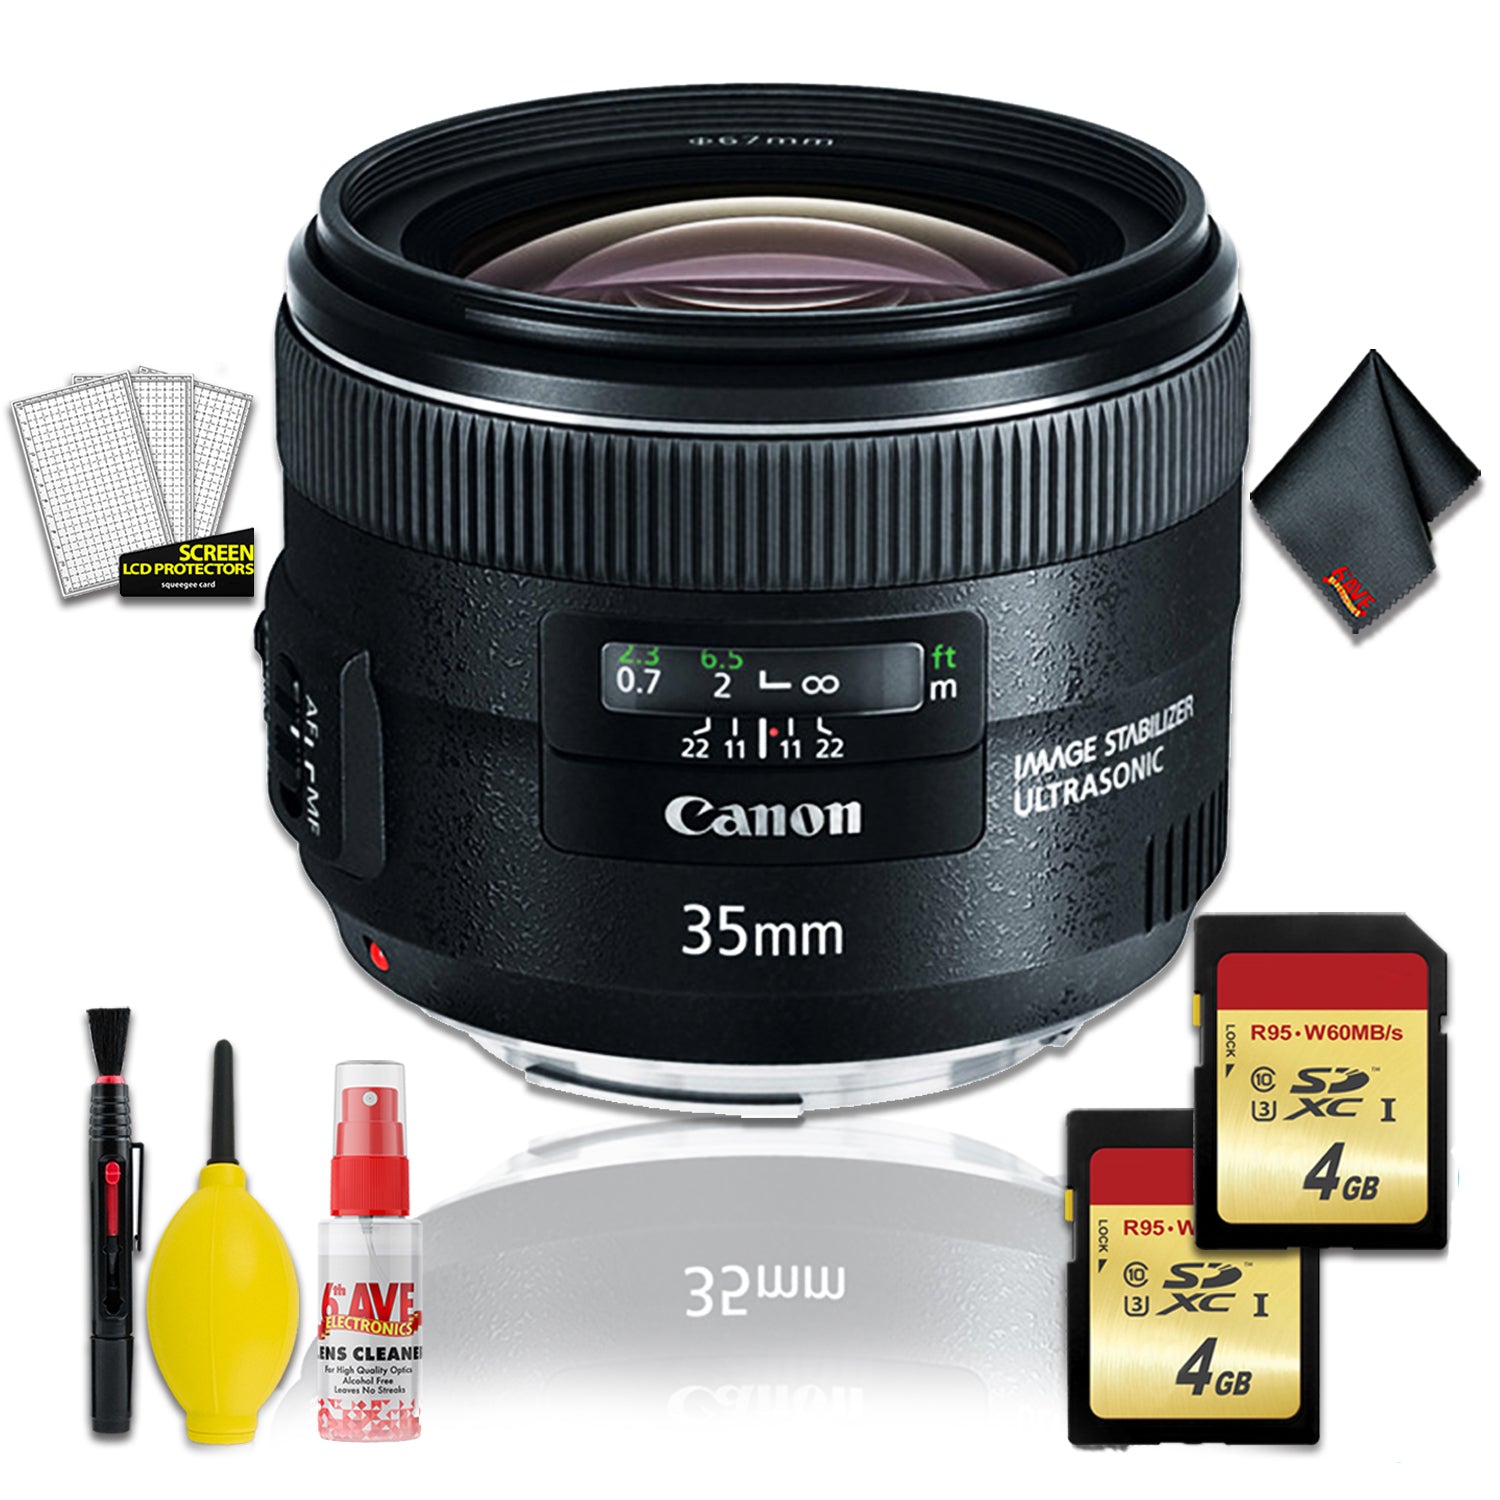 Canon EF 35mm f/2 IS USM Lens (Intl Model) w/ 2x 4gb Memory Card and Cleaning Kit